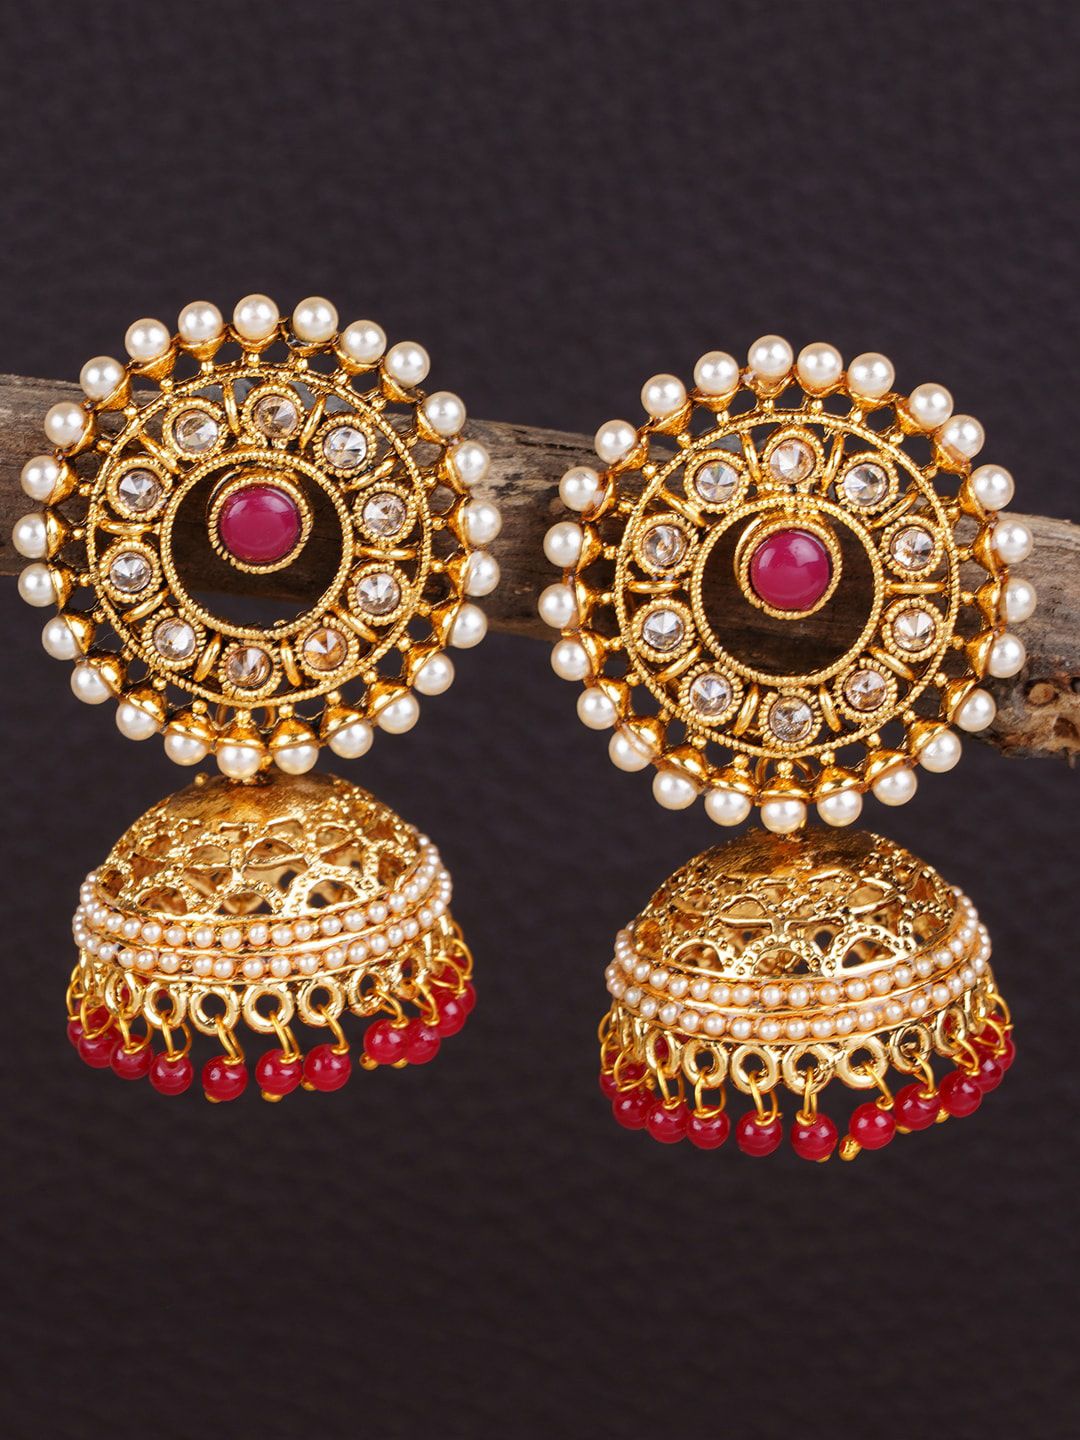 Shining Diva Gold-Toned & Red Dome Shaped Jhumkas Earrings Price in India